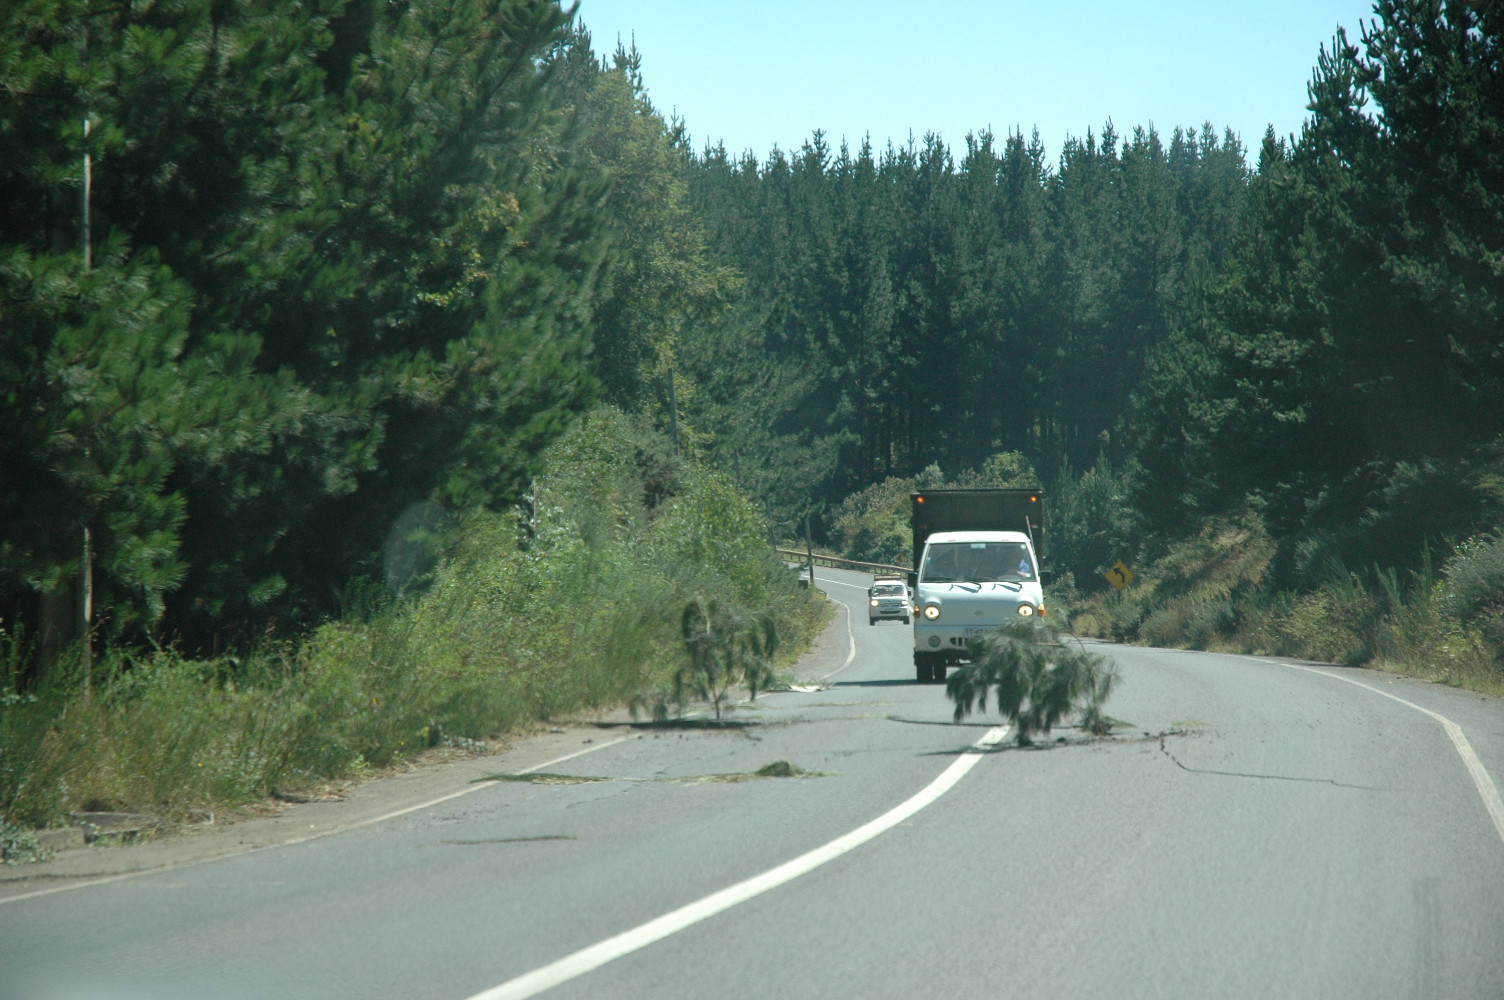 Earthquake Photos: The Long Road Home, Part One – Chile Living Today1504 x 1000